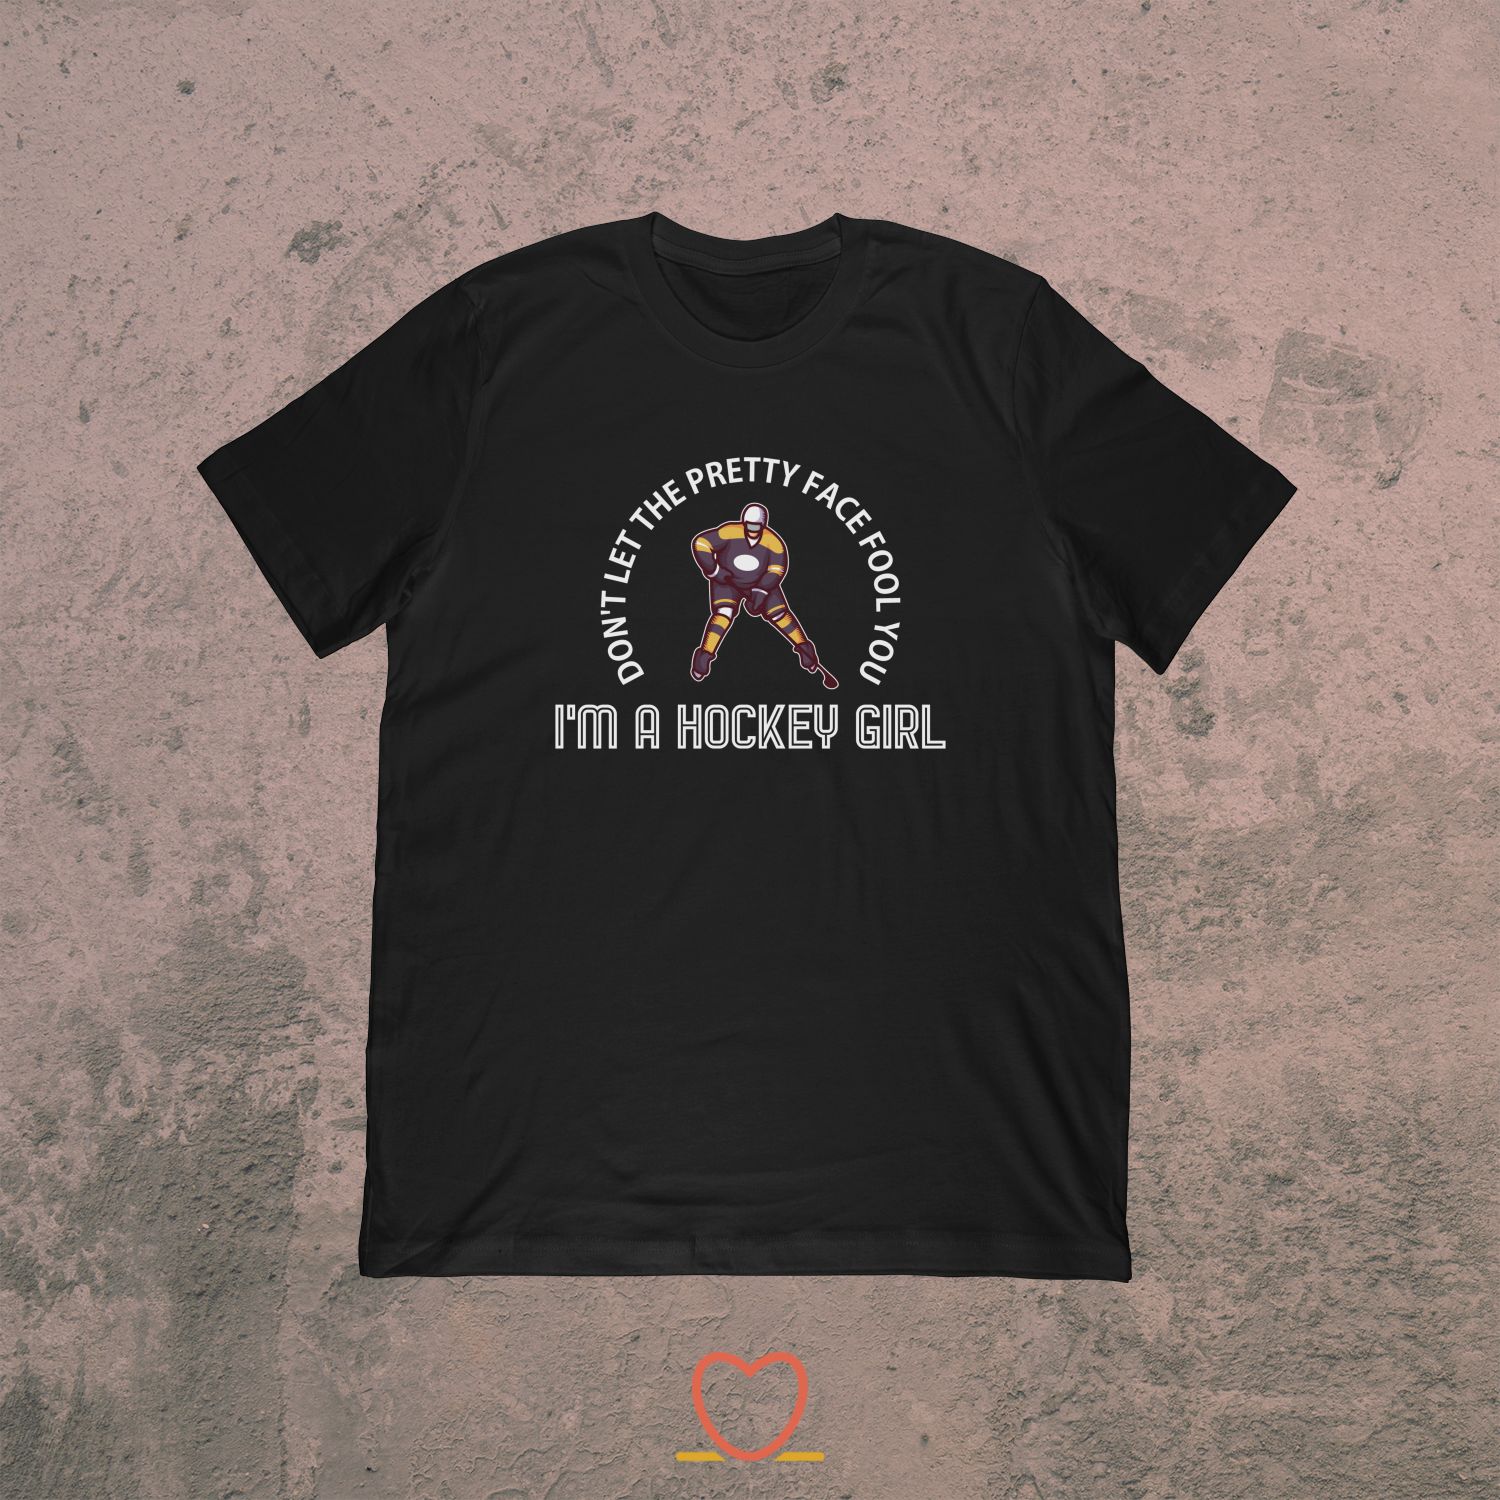 Don’t Let The Pretty Face Fool You – Ice Hockey Tee